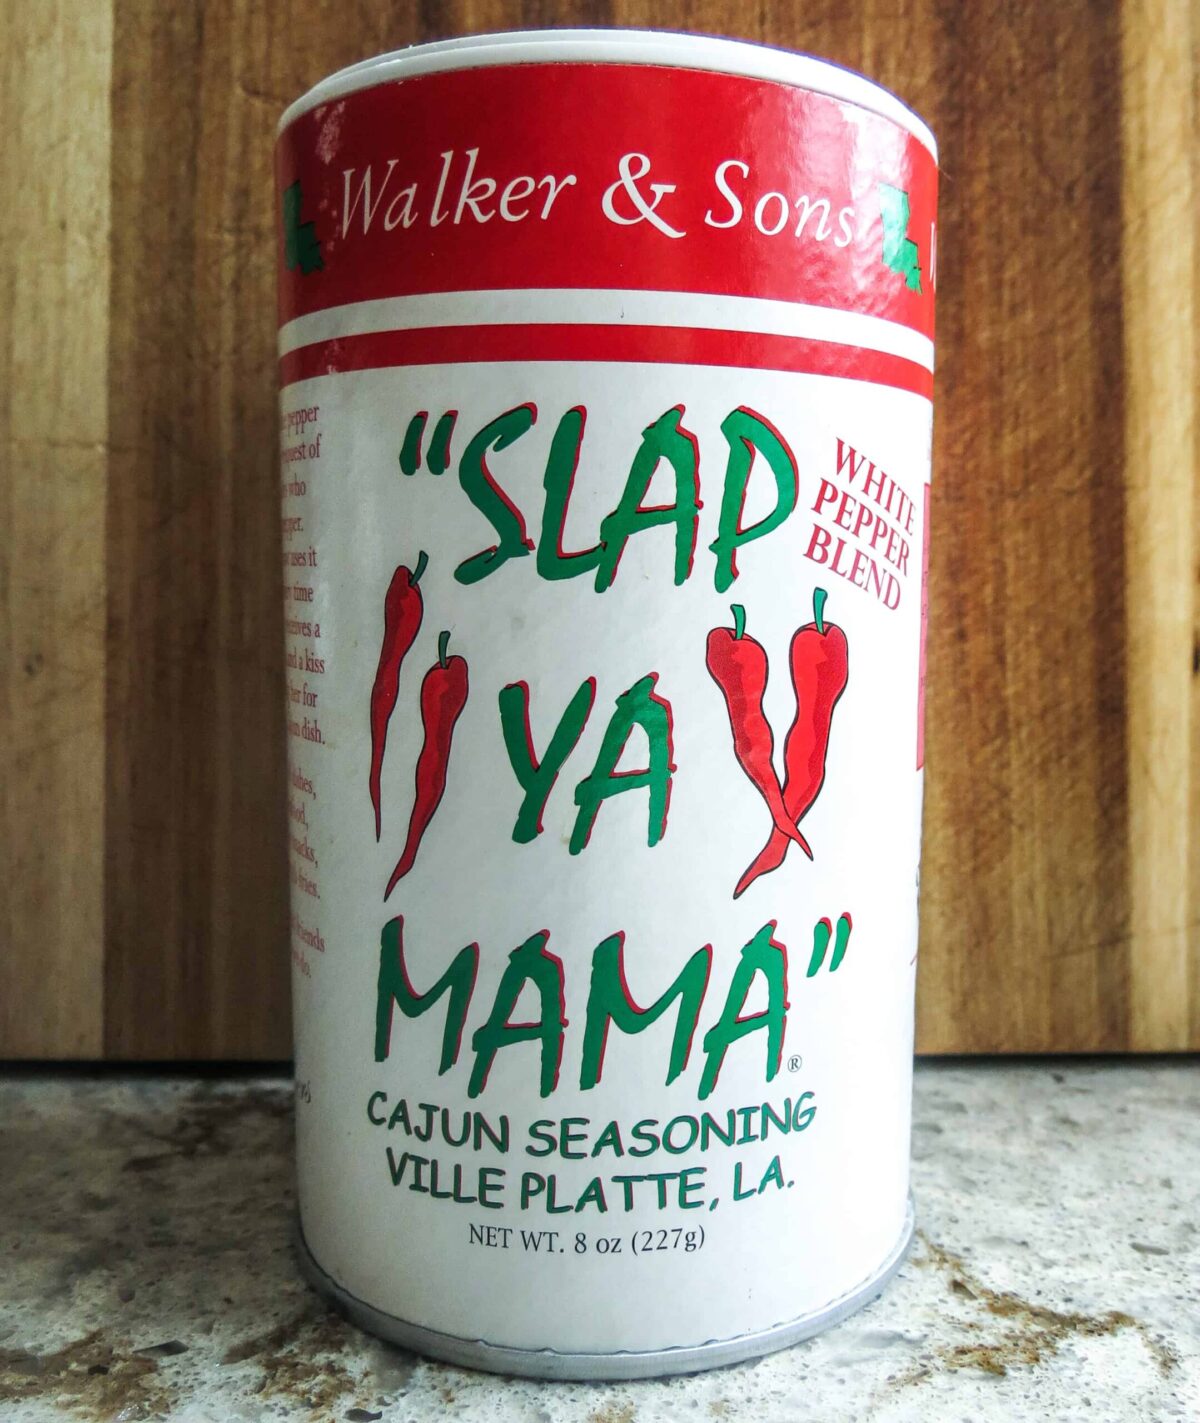 A container of Slap Ya Mama Cajun Seasoning white pepper blend for Shrimp And Corn Soup.